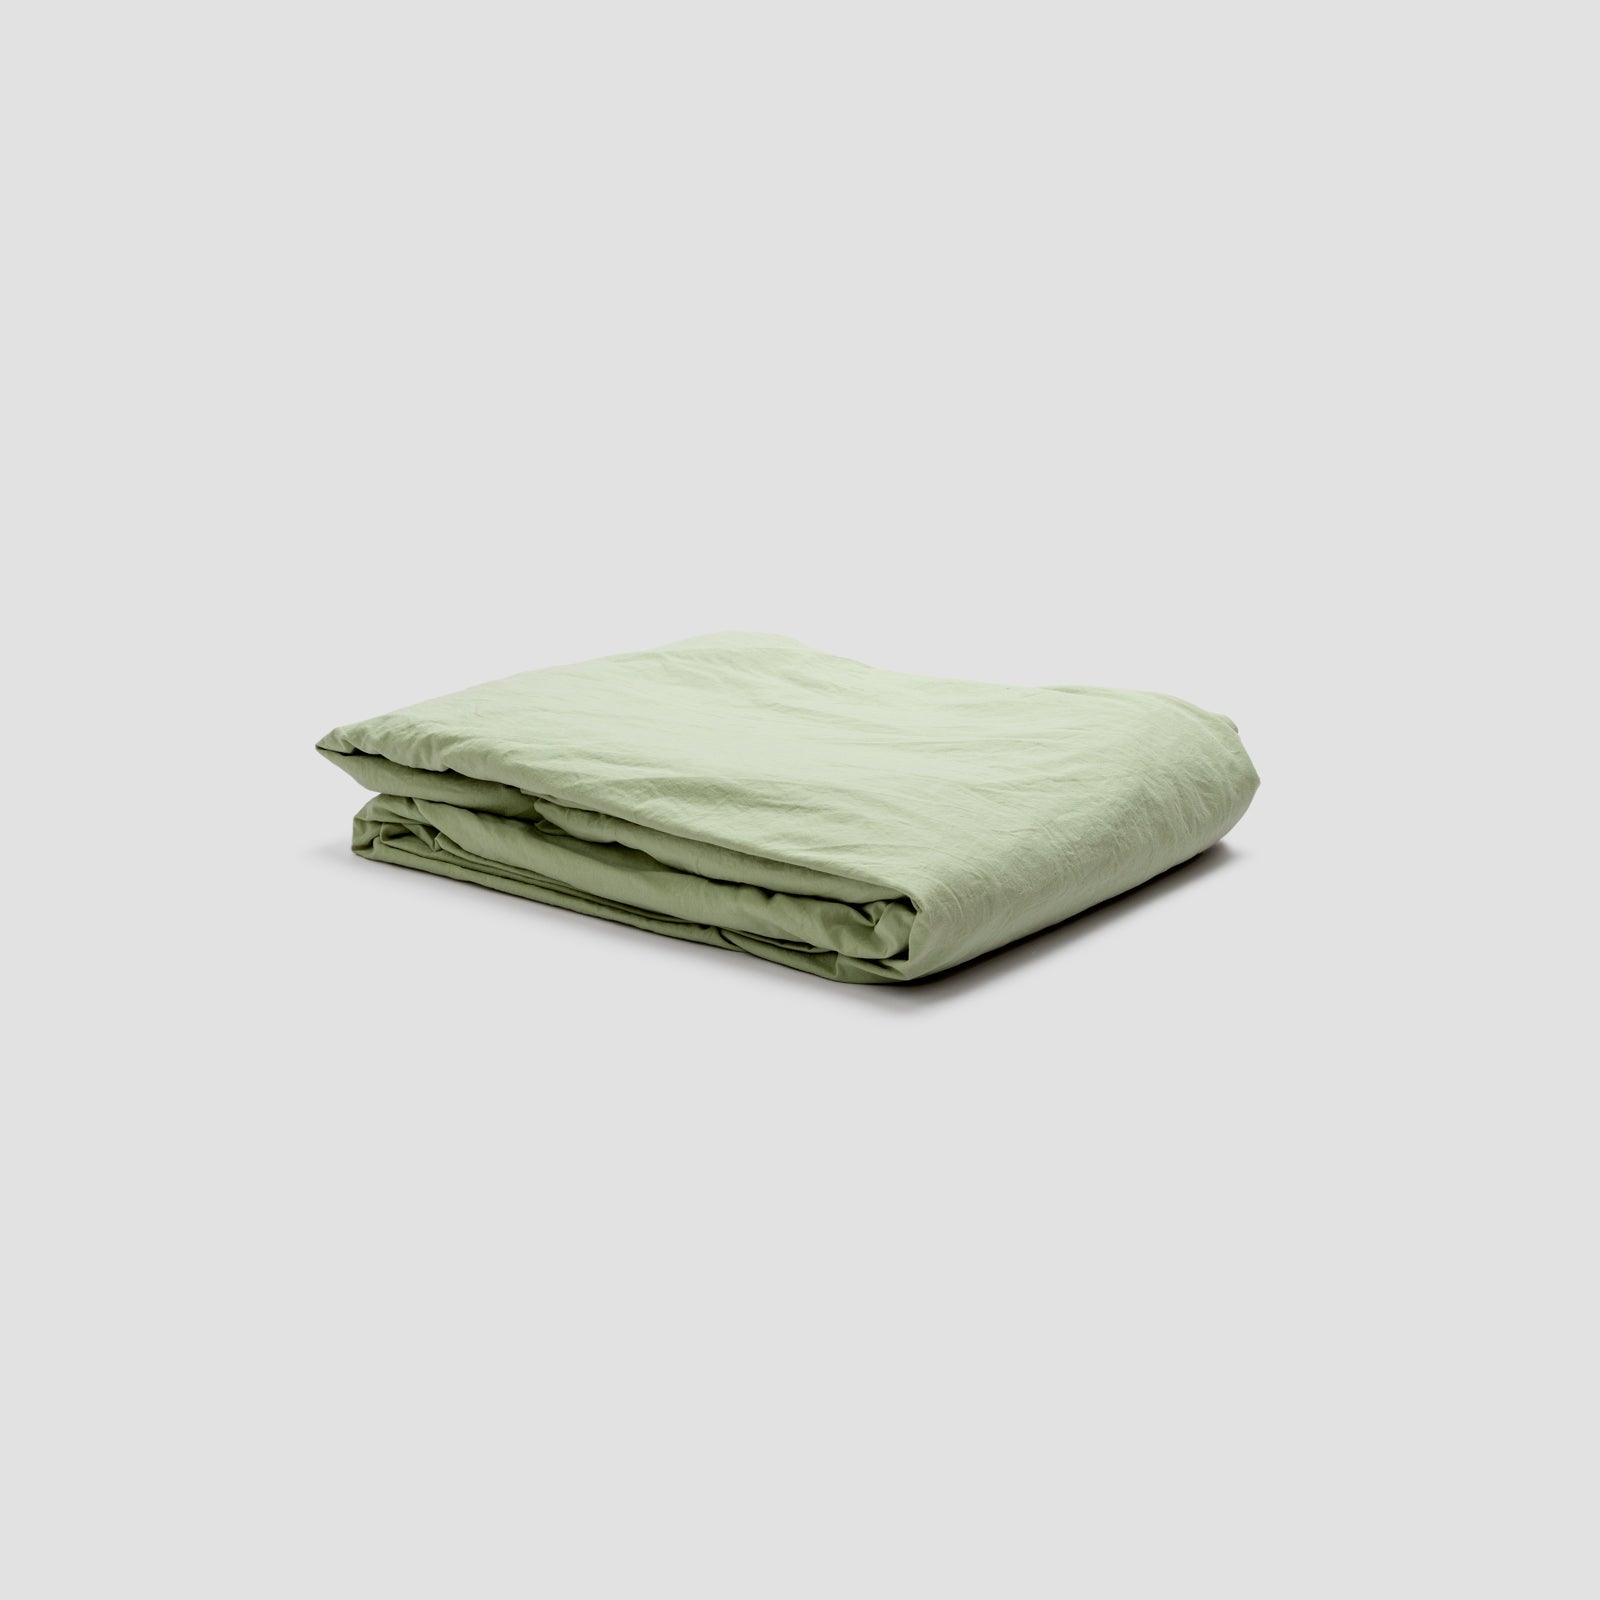 Apple Washed Cotton Percale Fitted Sheet - Piglet in Bed